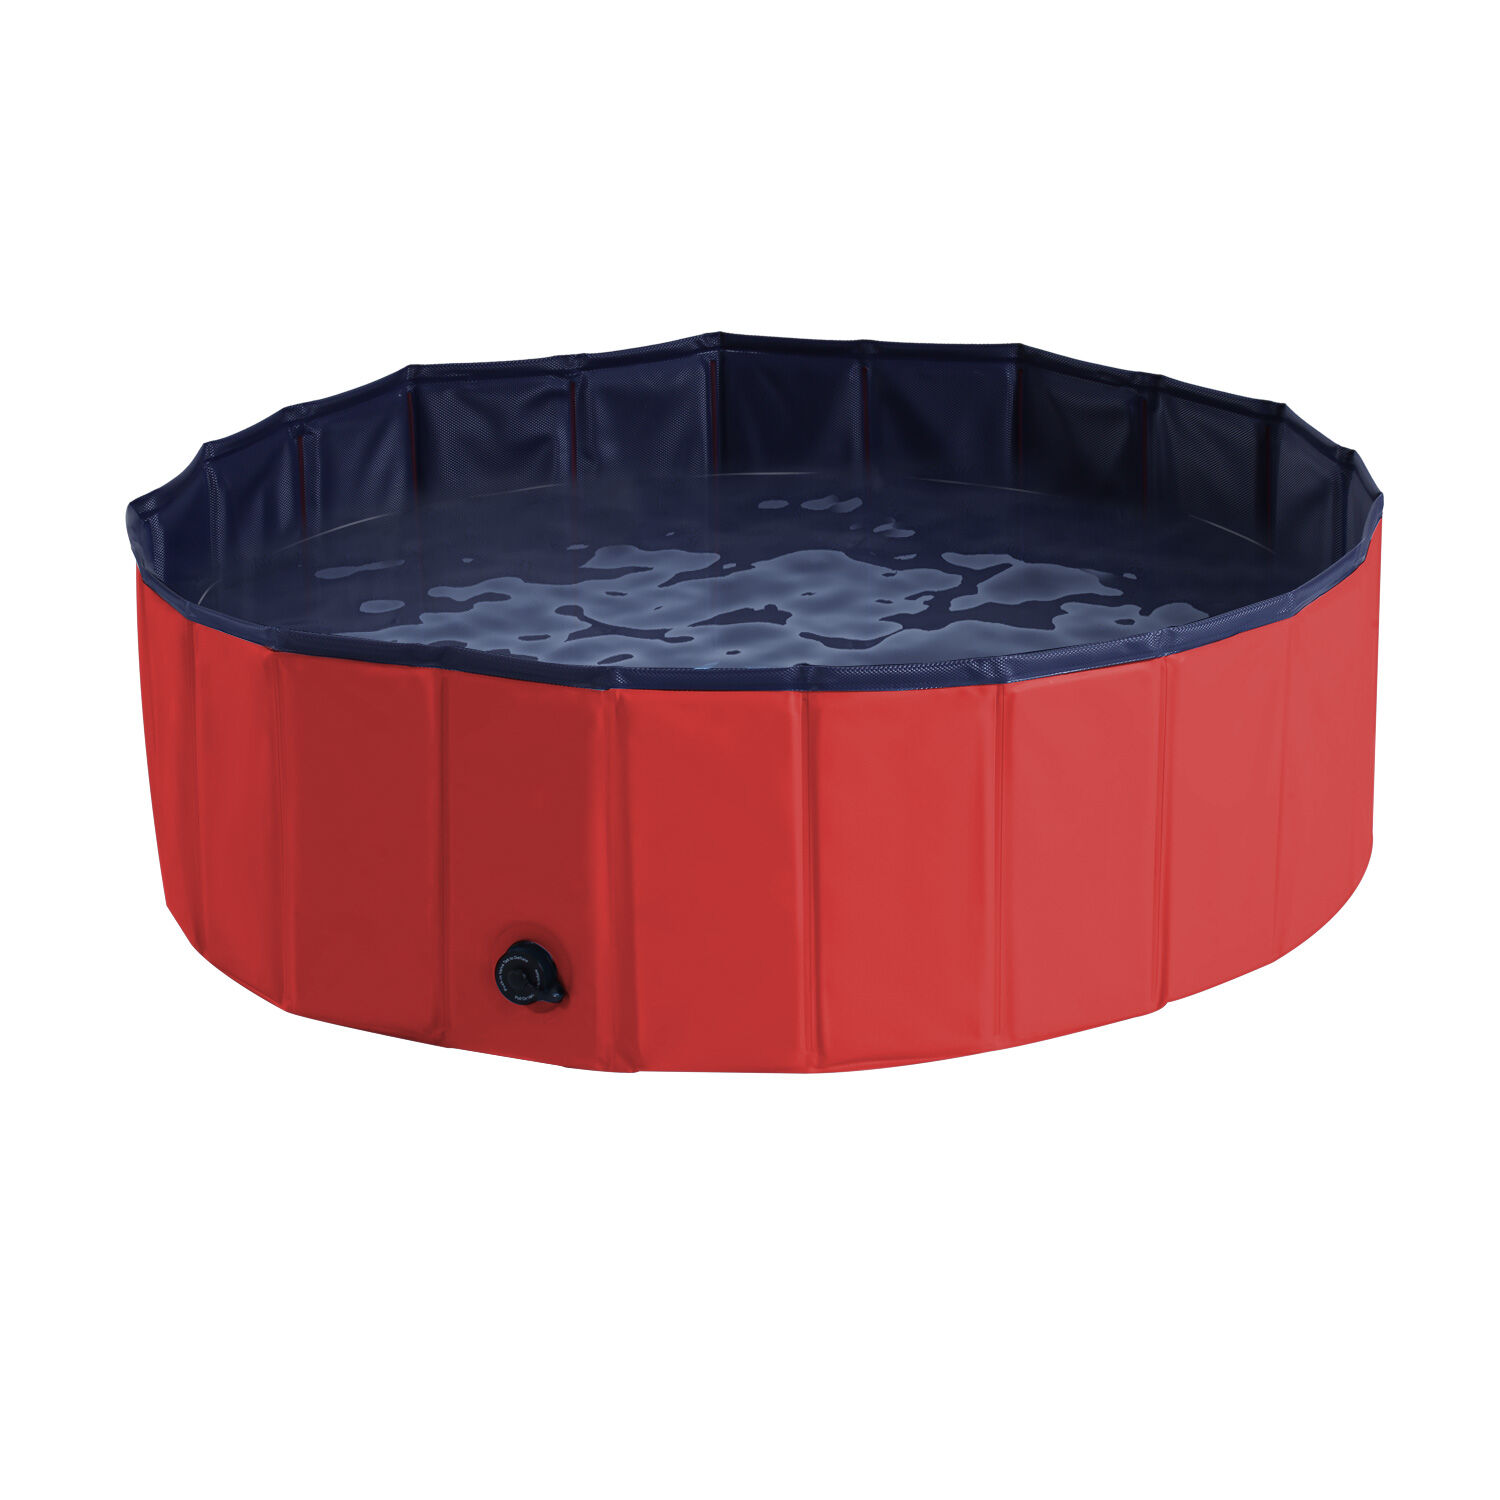 Pawhut Portable Pet Swimming Pool, Foldable Bathing Tub for Dogs and Cats, Non-Slip, Durable PVC, 妗?00x30H cm, Red